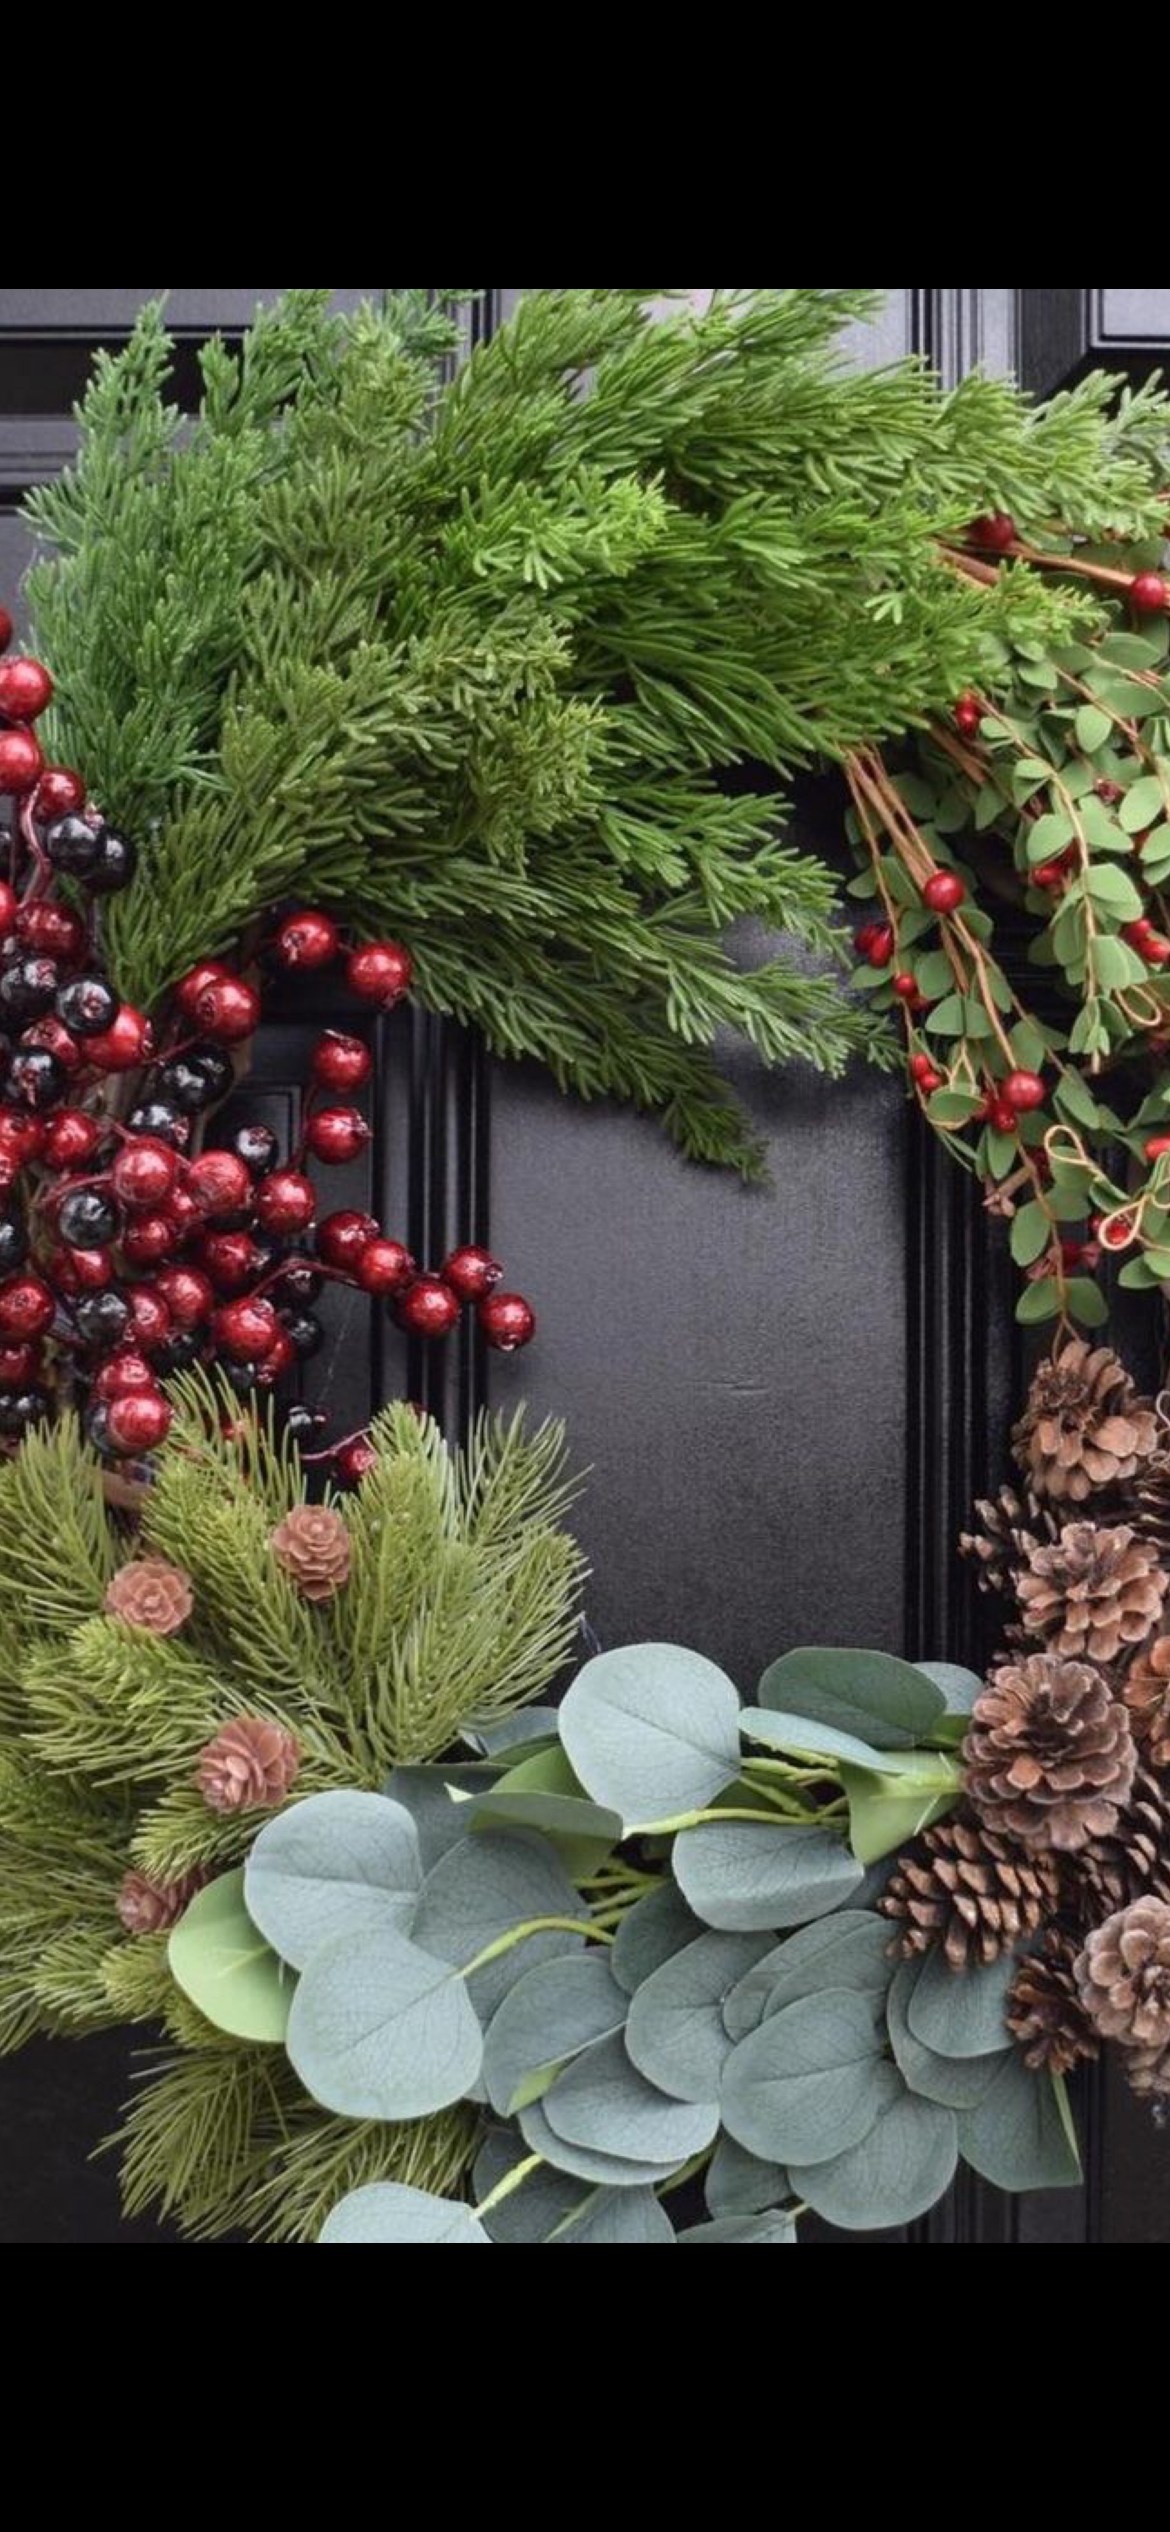 Elements of the Holiday Wreath